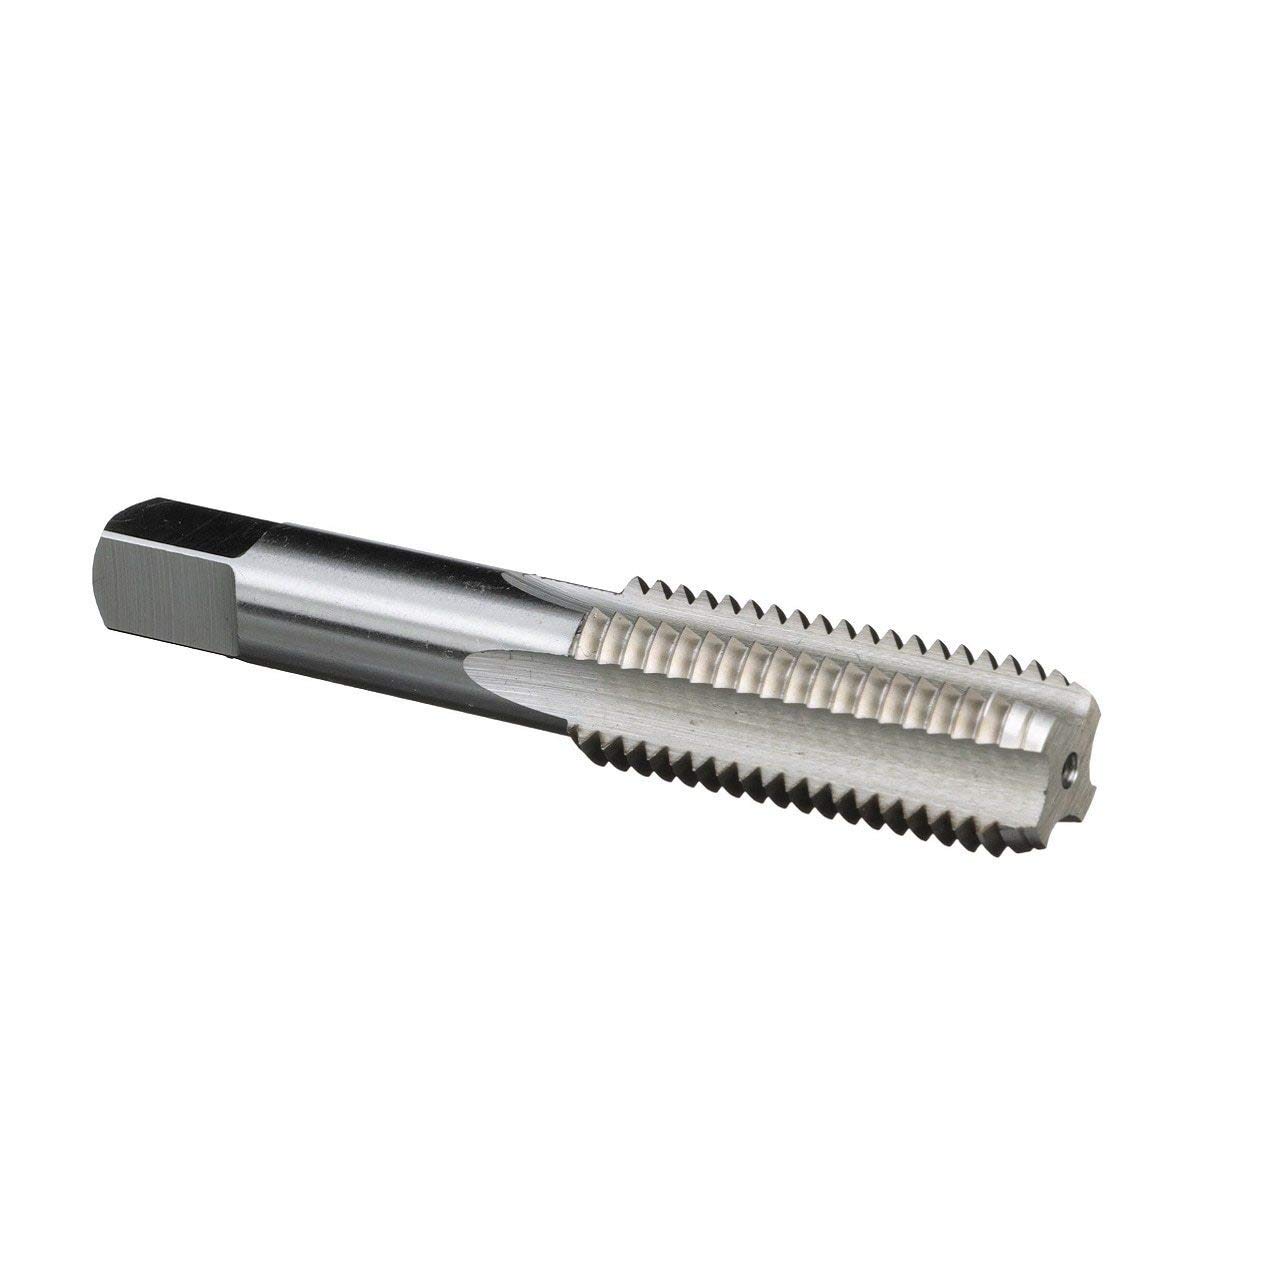 Drill America 8-36 UNF High Speed Steel Bottoming Tap Pack of 12並行輸入品